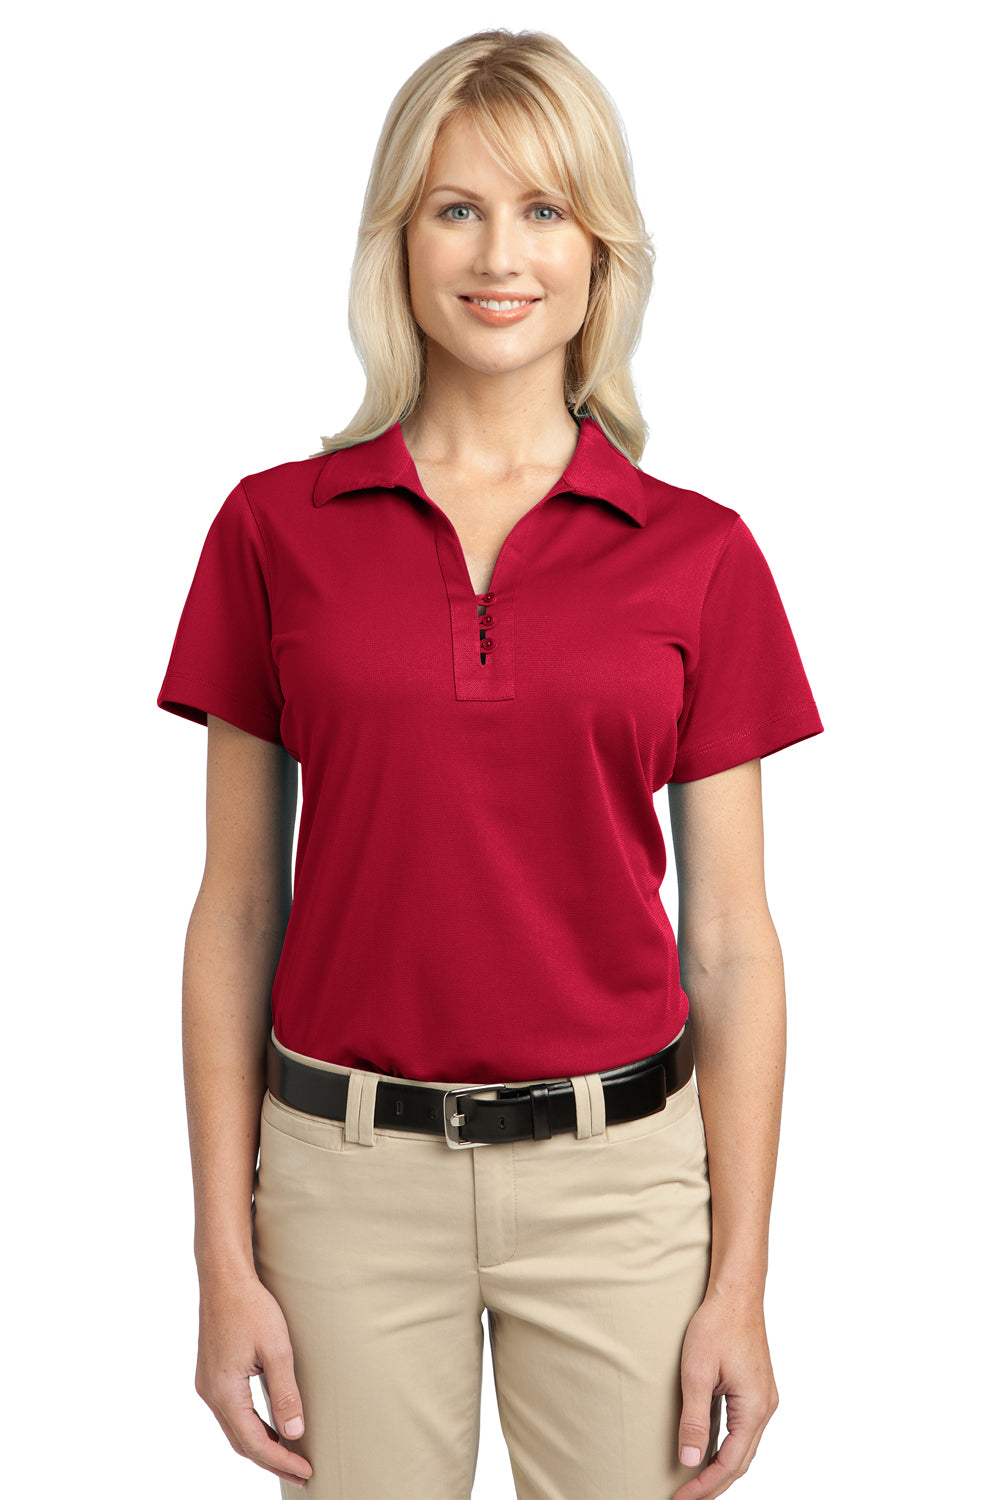 Port Authority L527 Womens Tech Moisture Wicking Short Sleeve Polo Shirt Red Front